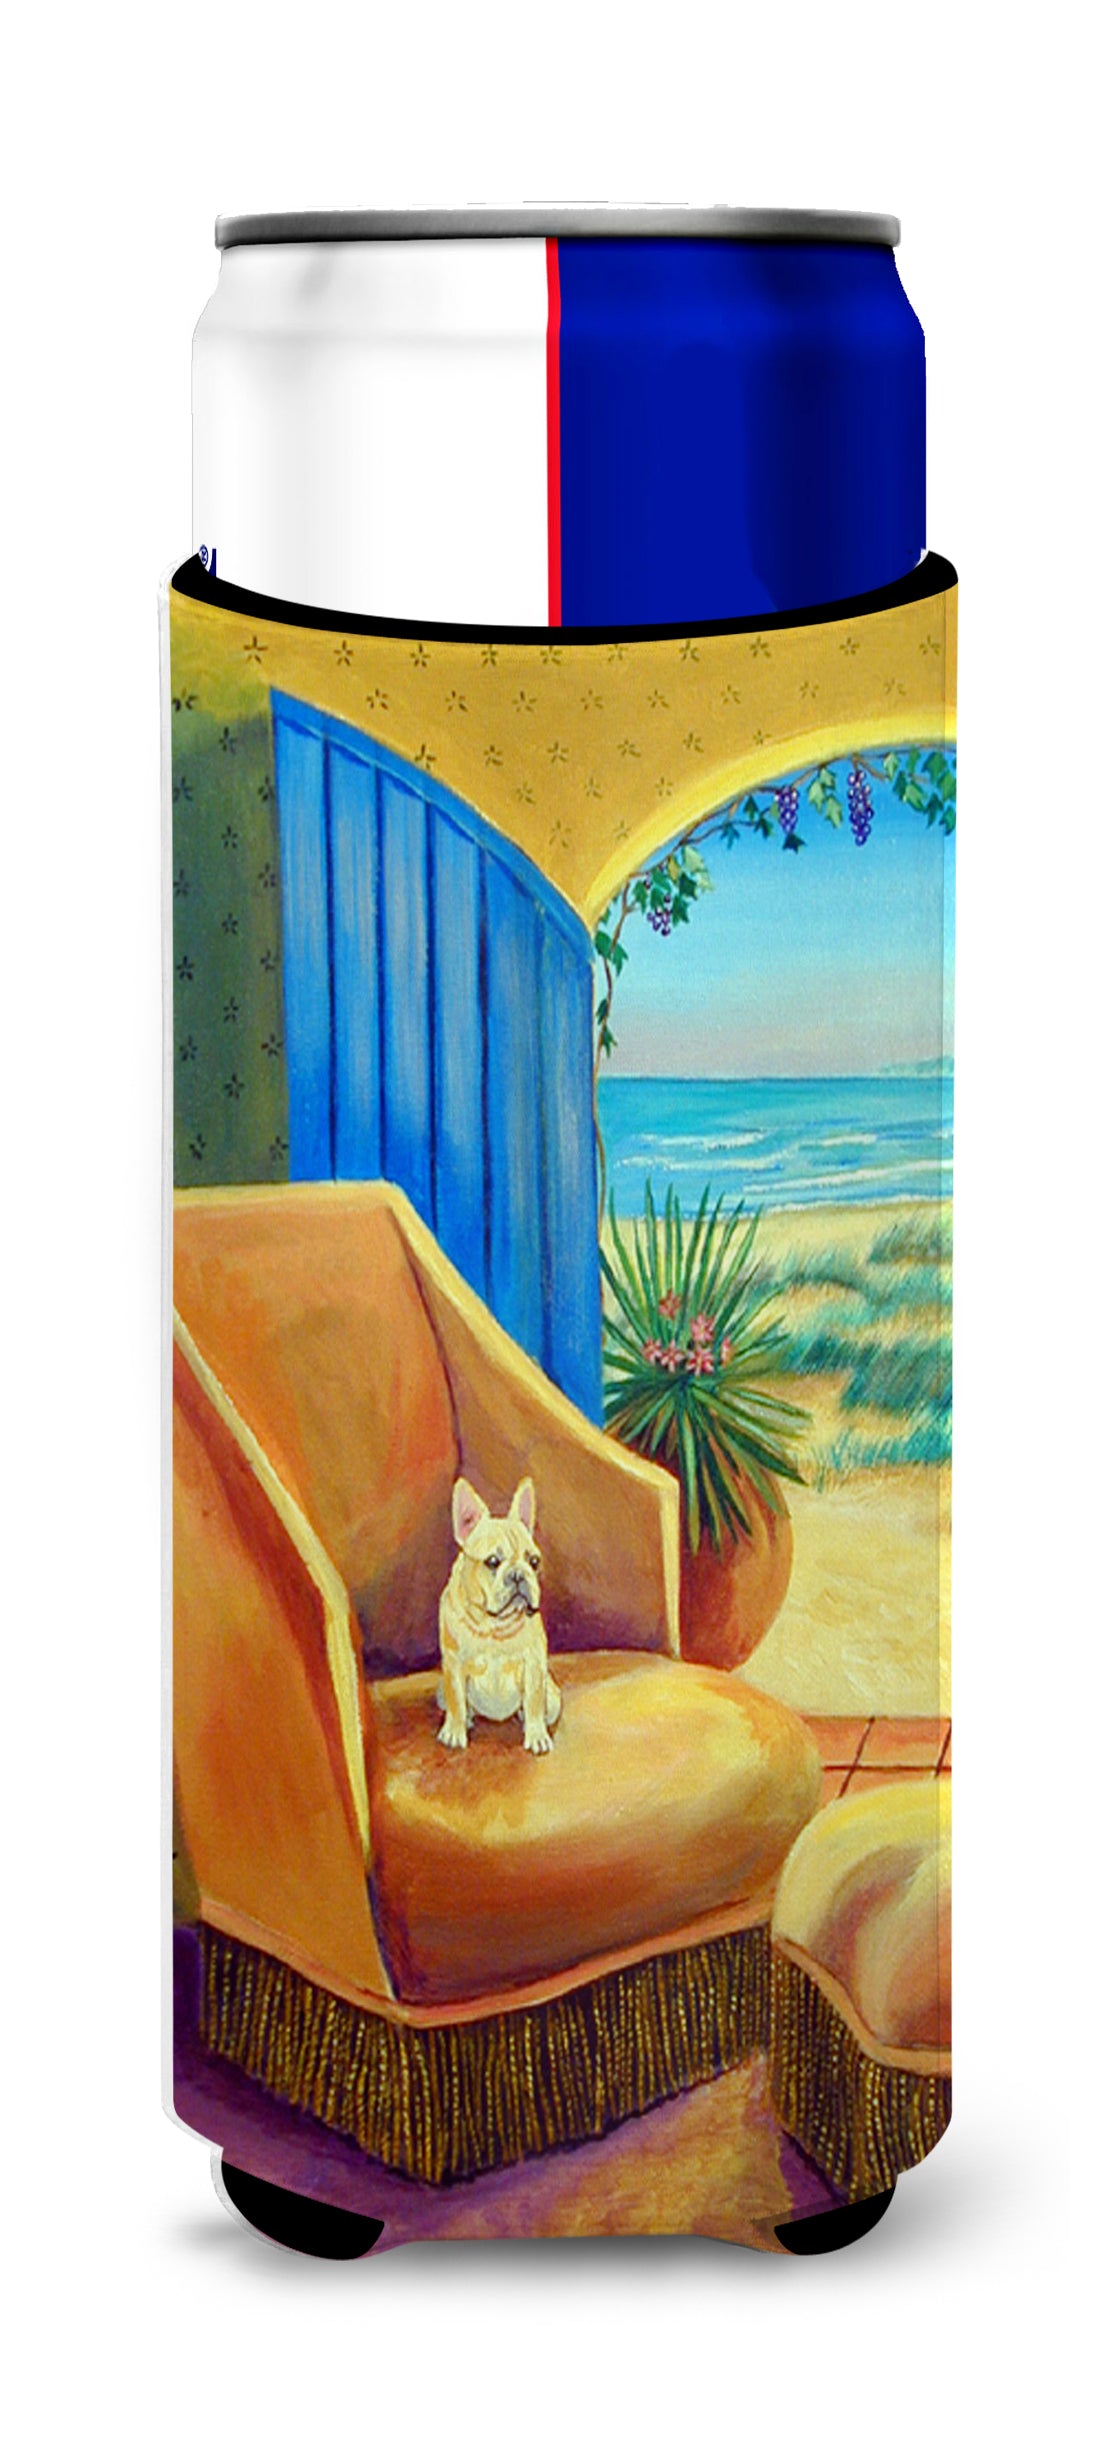 French Bulldog at the beach cottage Ultra Beverage Insulators for slim cans 7181MUK